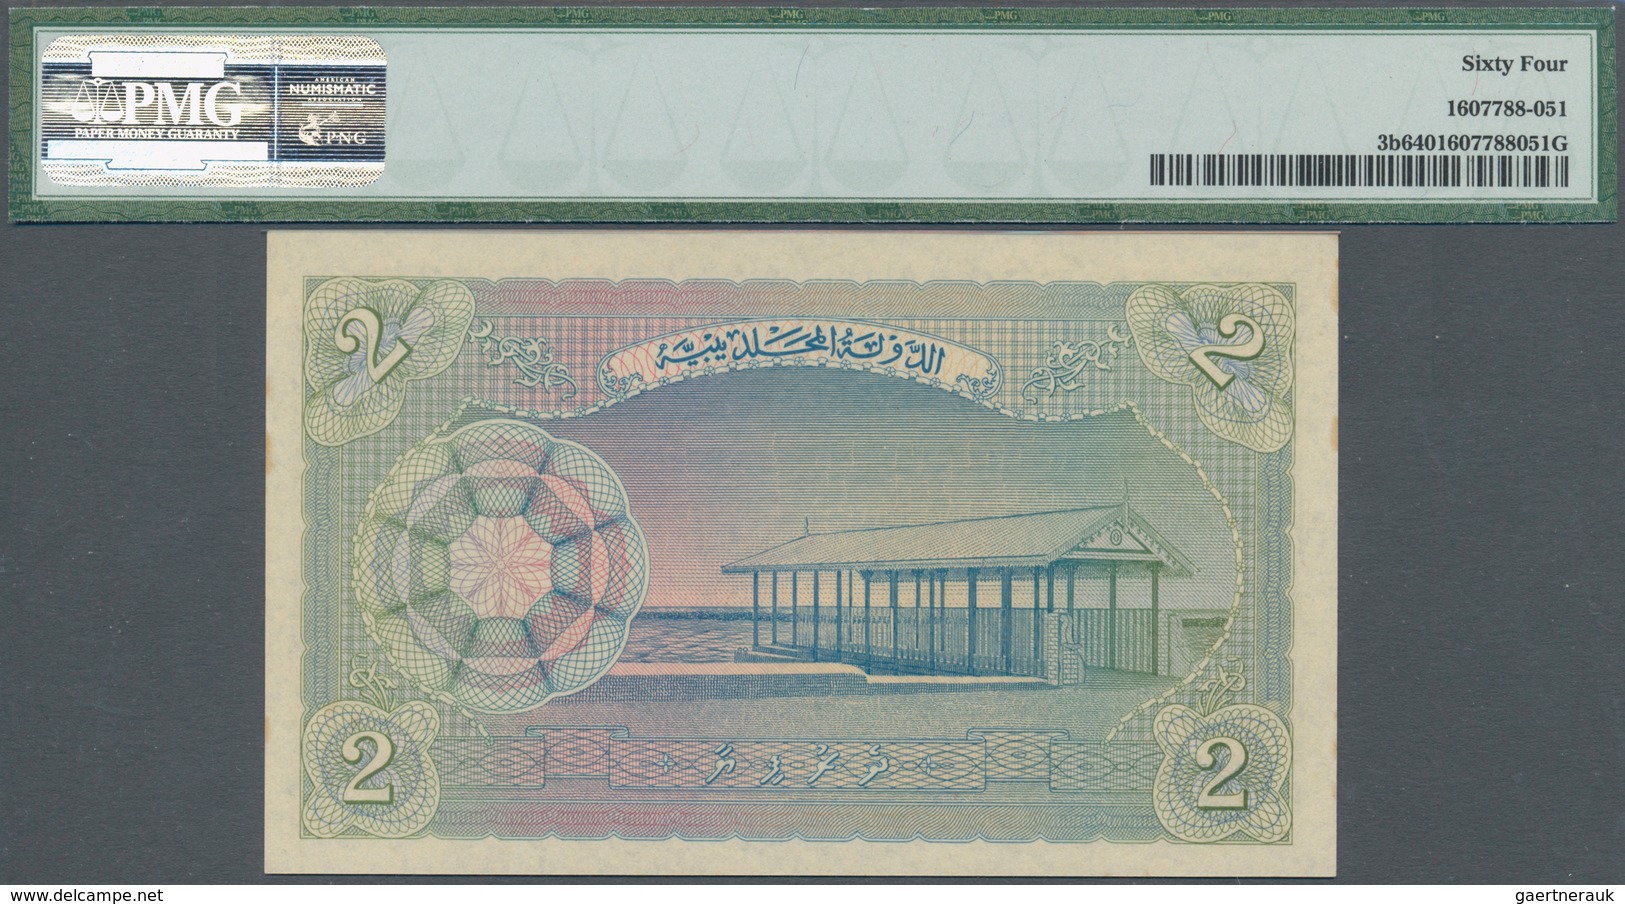 01999 Maldives / Malediven: set of 6 notes containing 1 to 100 Rupees 1960 P. 2b-7b, all PMG graded 64 Cho